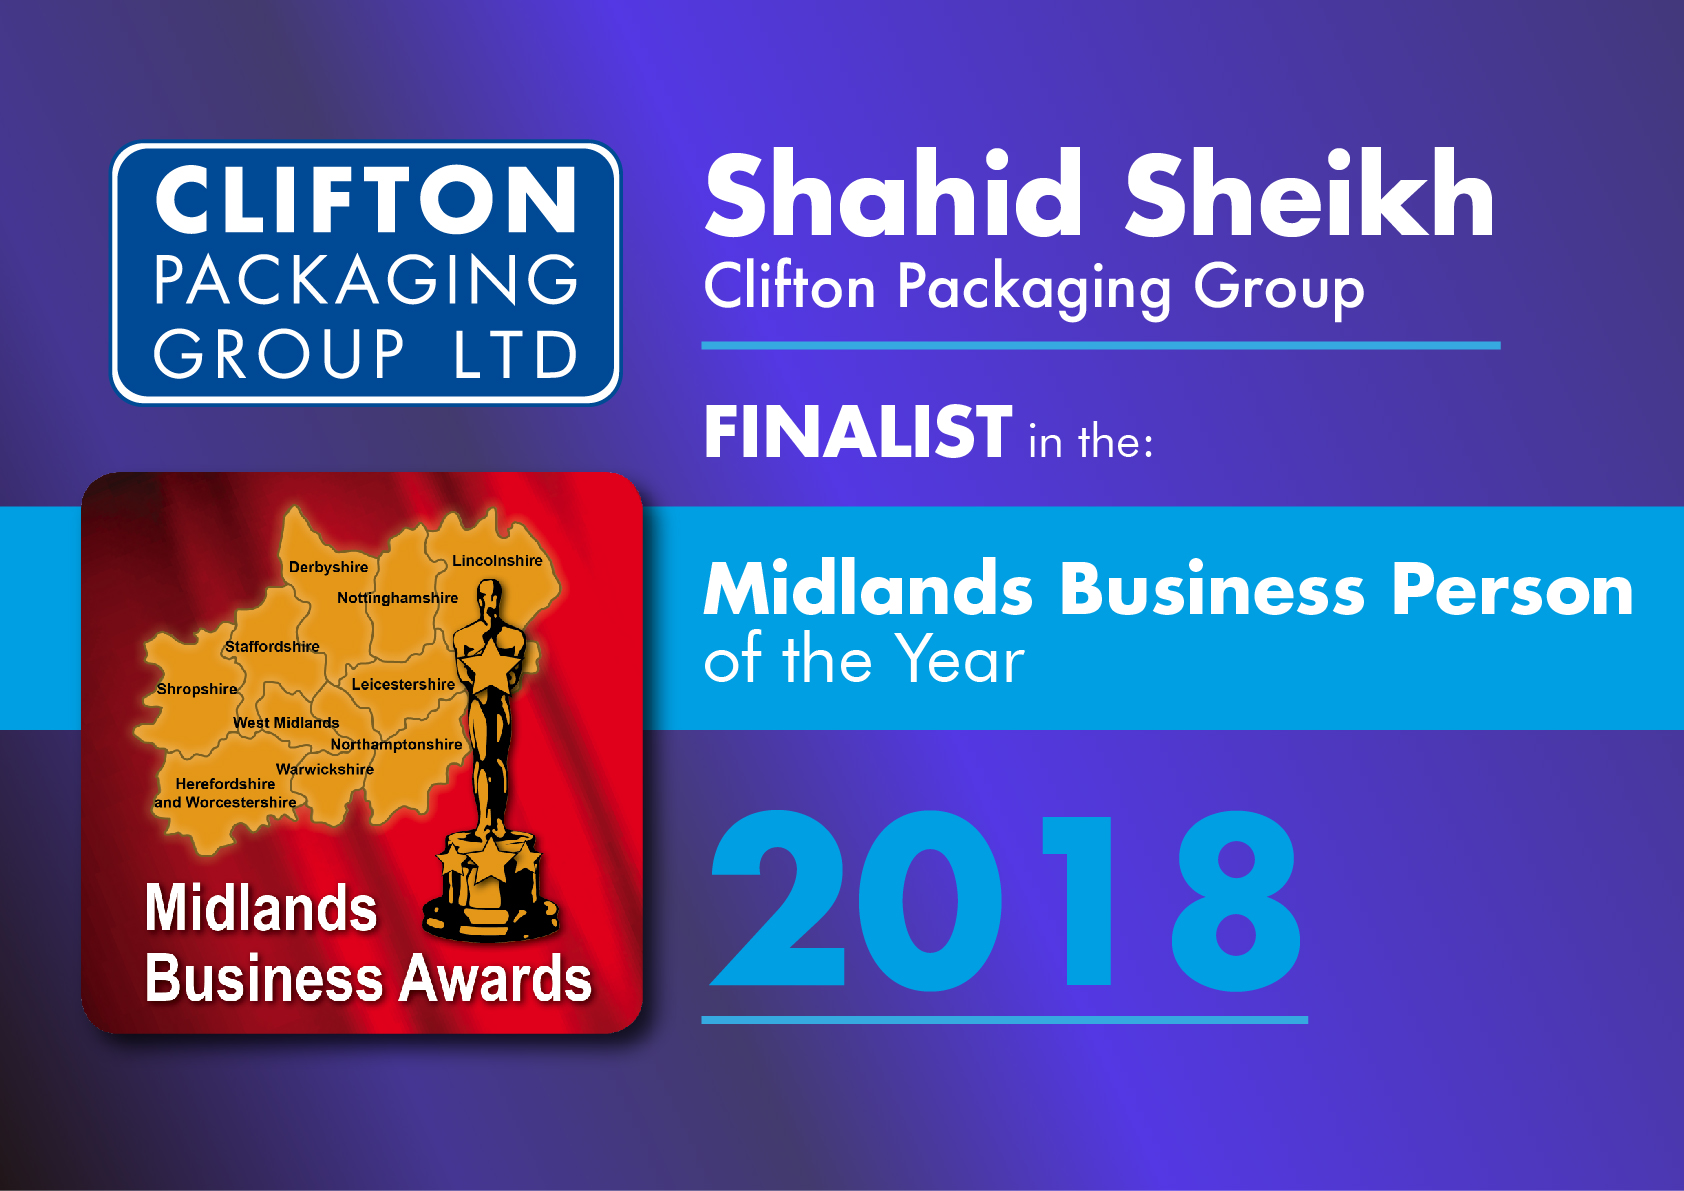 Shahid Sheikh OBE - Finalist in the Midlands Business Person of the Year 2018